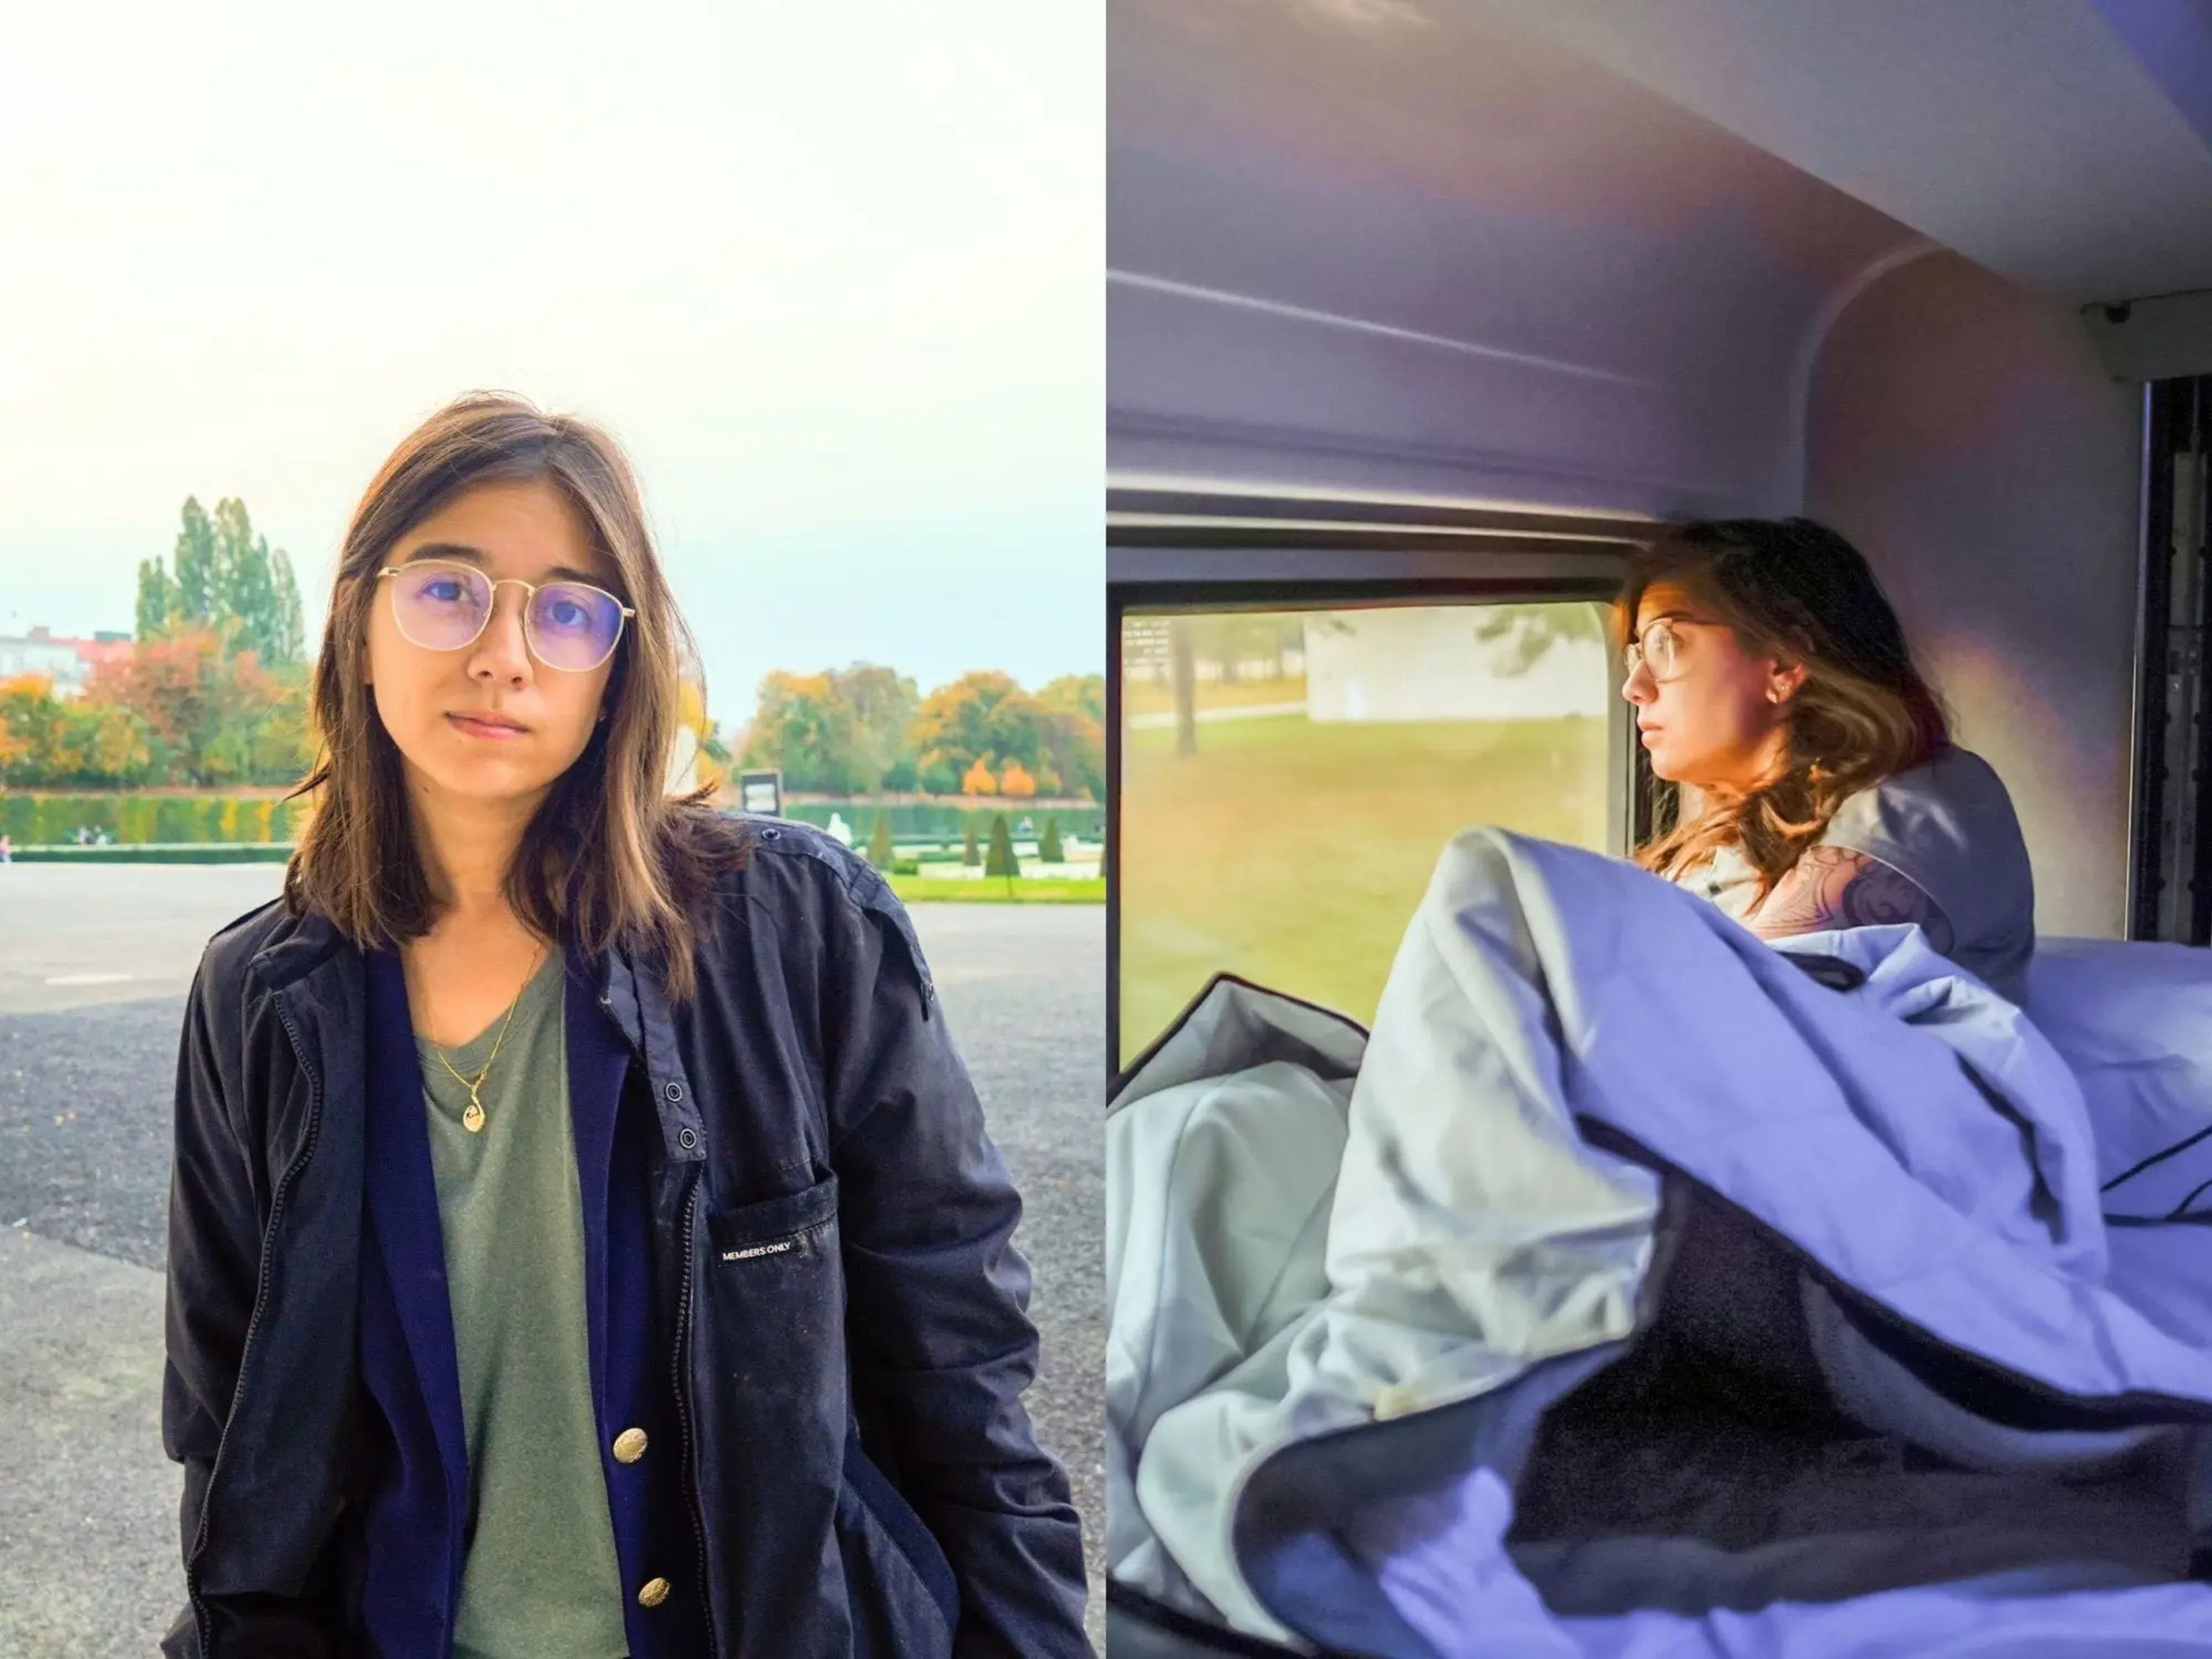 Left: The author in a gray shirt and a black jacket in front of a road with trees in the background on a cloudy day. Right: The author lays in a train bunk with a blanket over her while she looks out the window to the left.